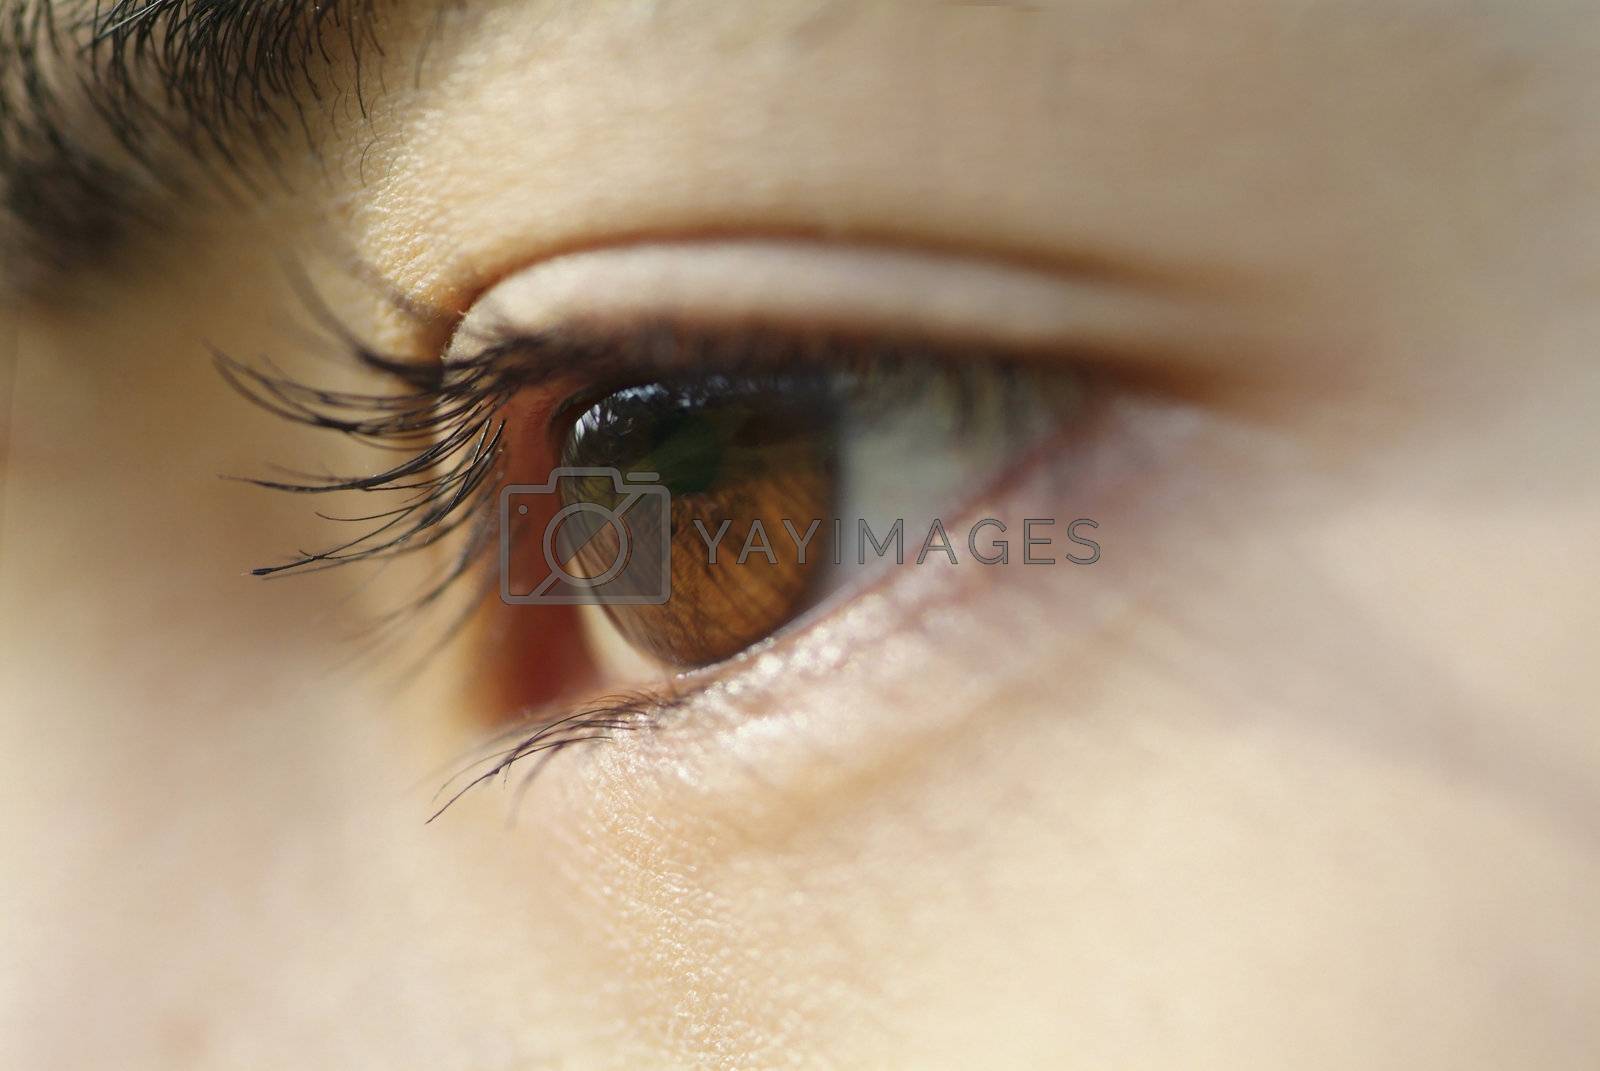 Royalty free image of Asia eye by epixx